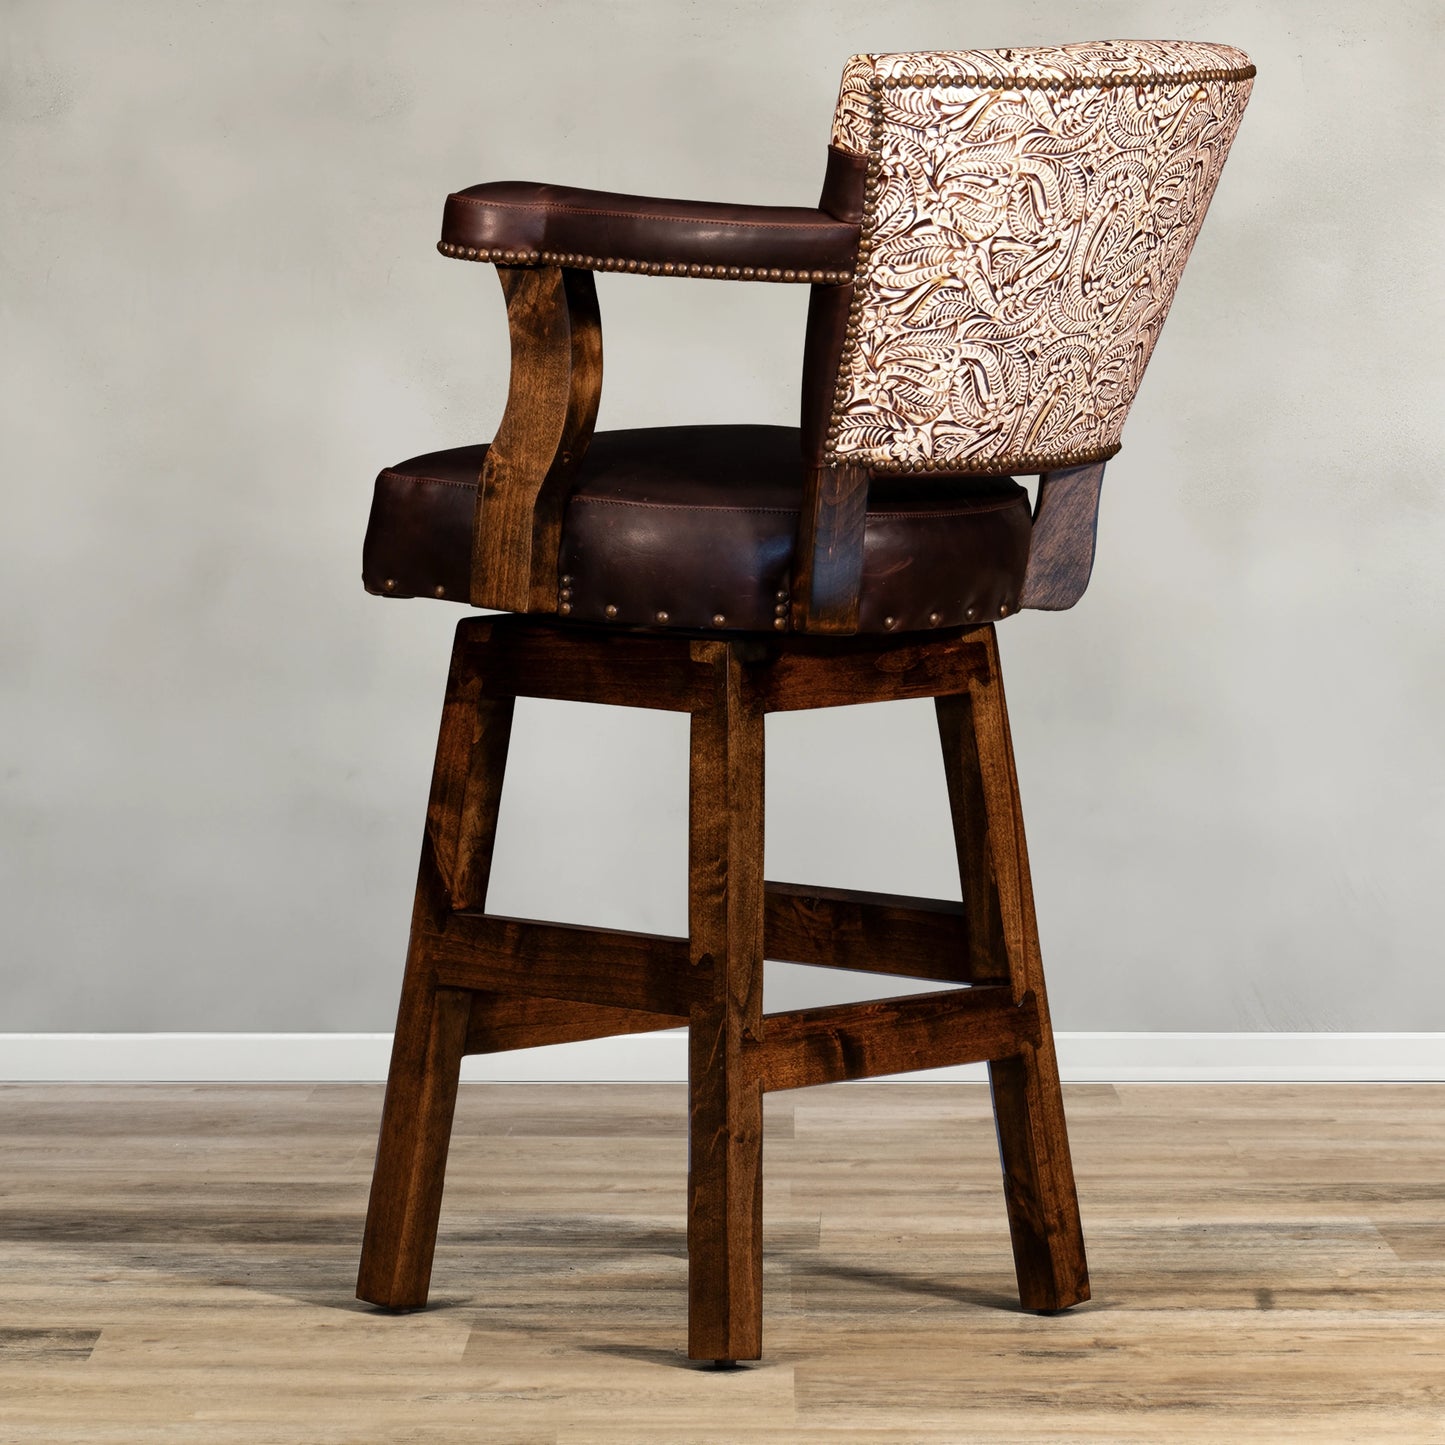 Experience ultimate comfort and style with our Floral Yoke Chisum Barstool. Made with high-quality leather and accented with nail detailing, this stool also boasts an embossed leather yoke and swivel feature. Perfect for any space, it offers both durability and luxury.